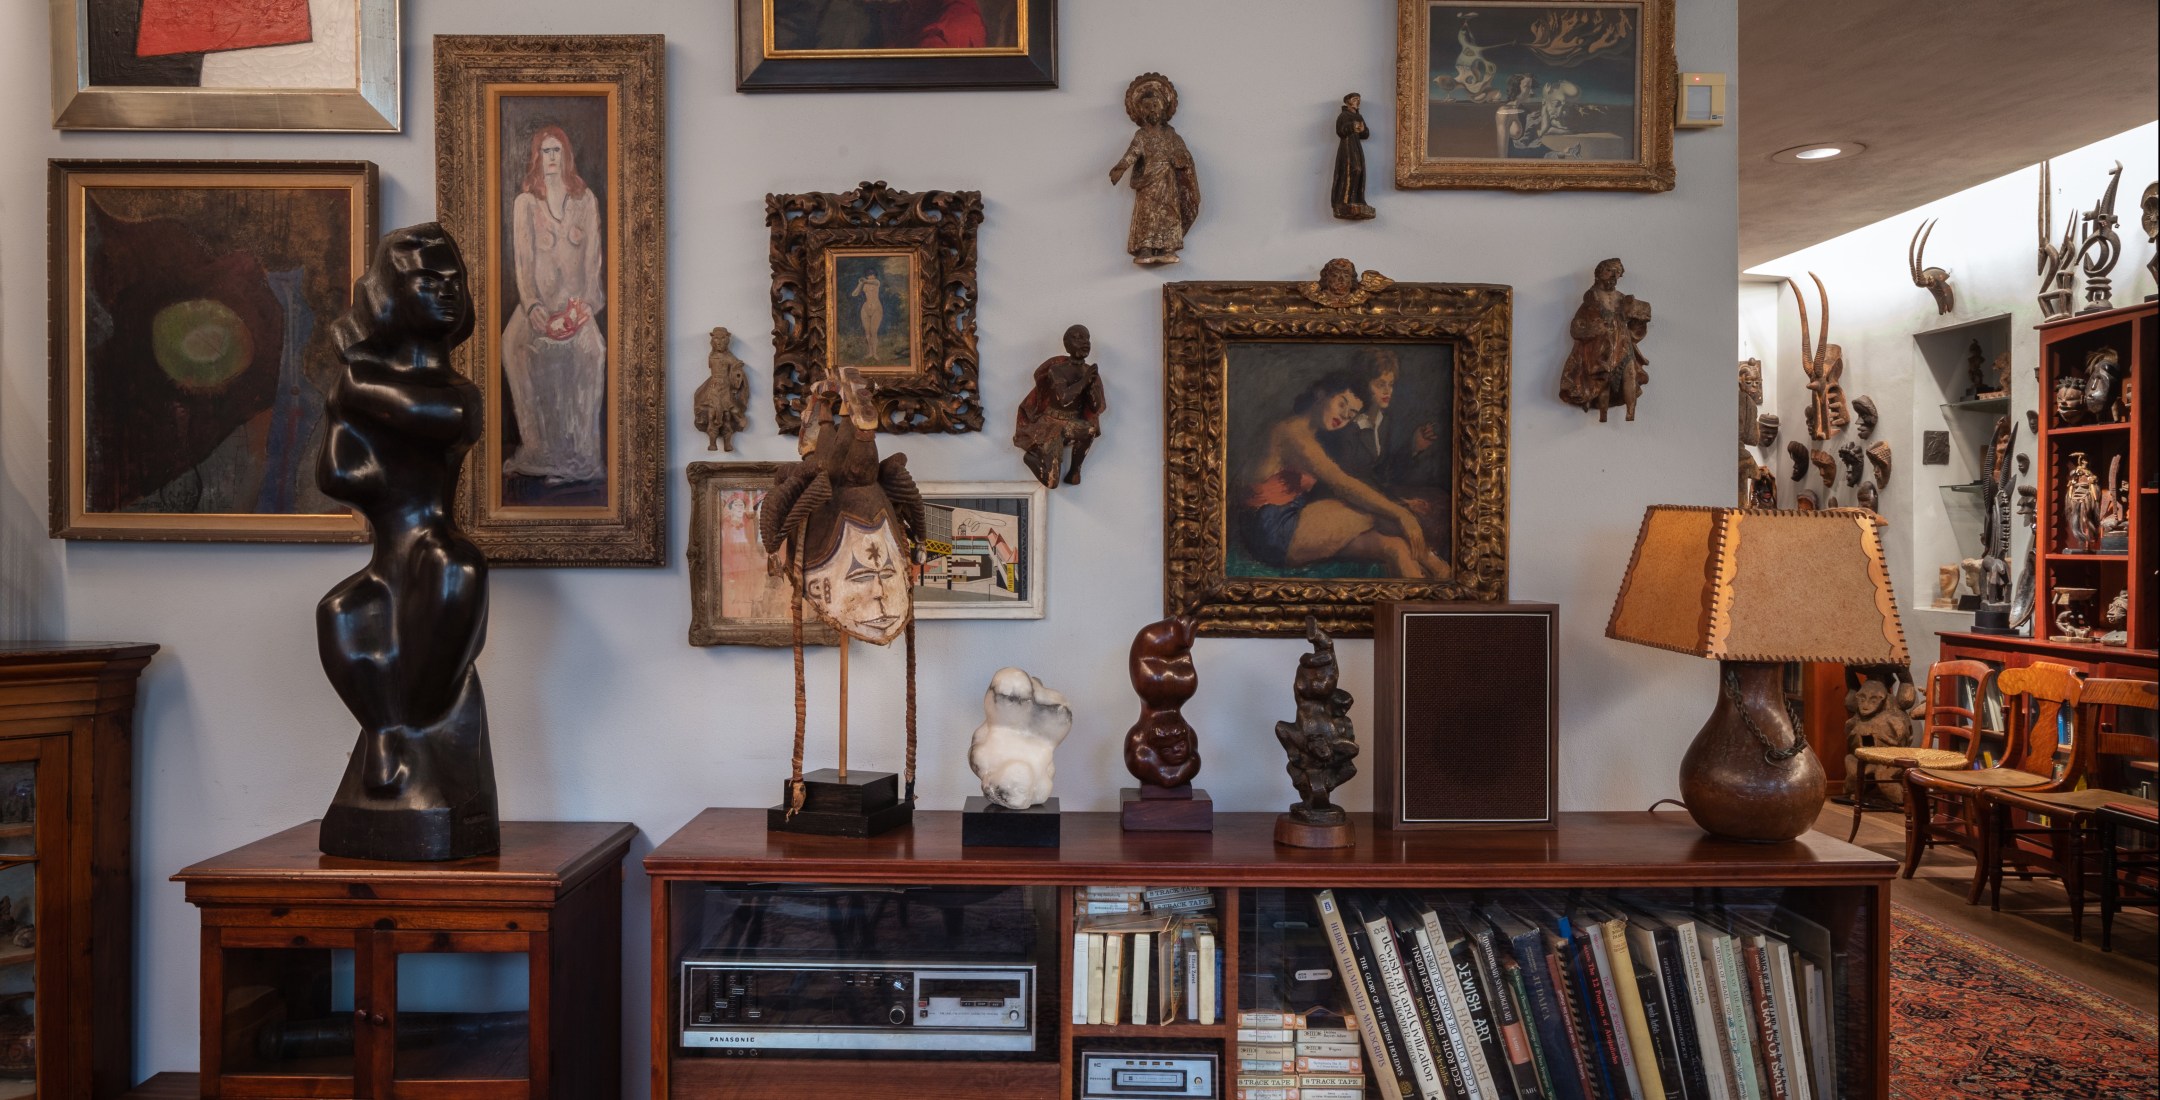 On a wooden table are various small sculptures and a brown lamp. On the grey wall are small mounted sculptures and various paintings of different sizes. The photo reveals a row of chairs and more mounted sculptures in the distance, around the corner.